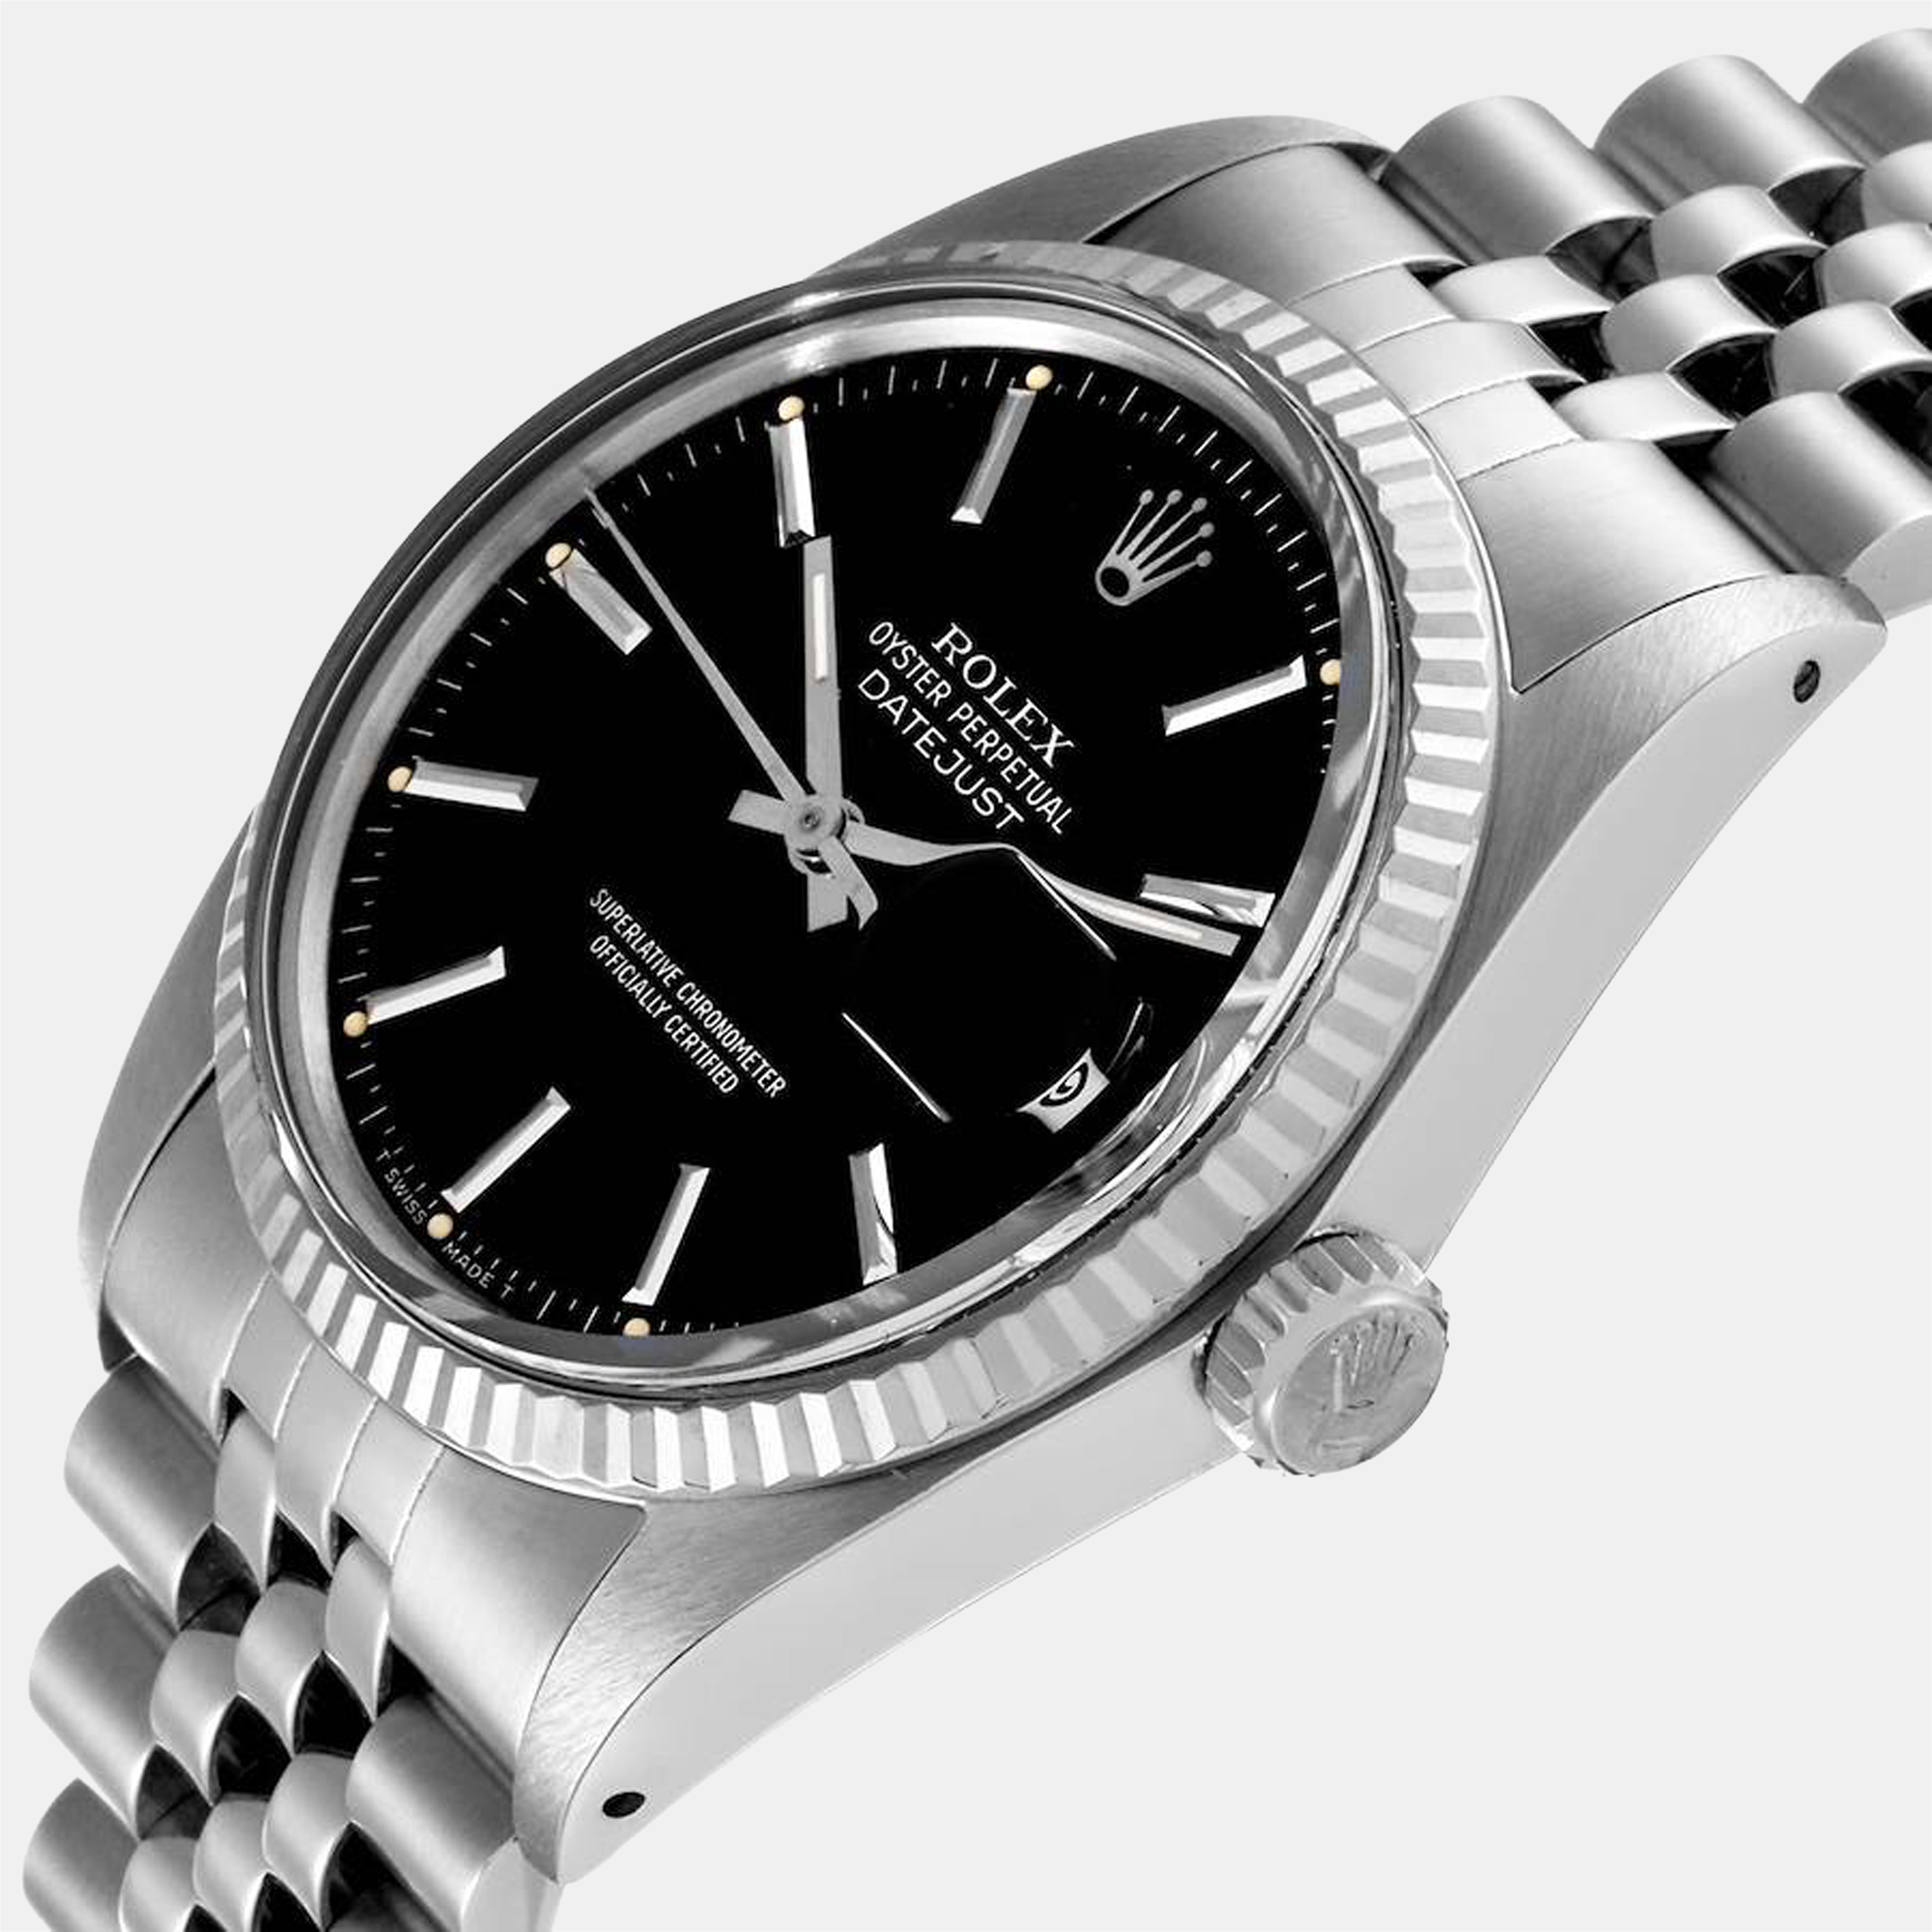 

Rolex Black 18K White Gold And Stainless Steel Datejust Vintage 16014 Automatic Men's Wristwatch 36 mm